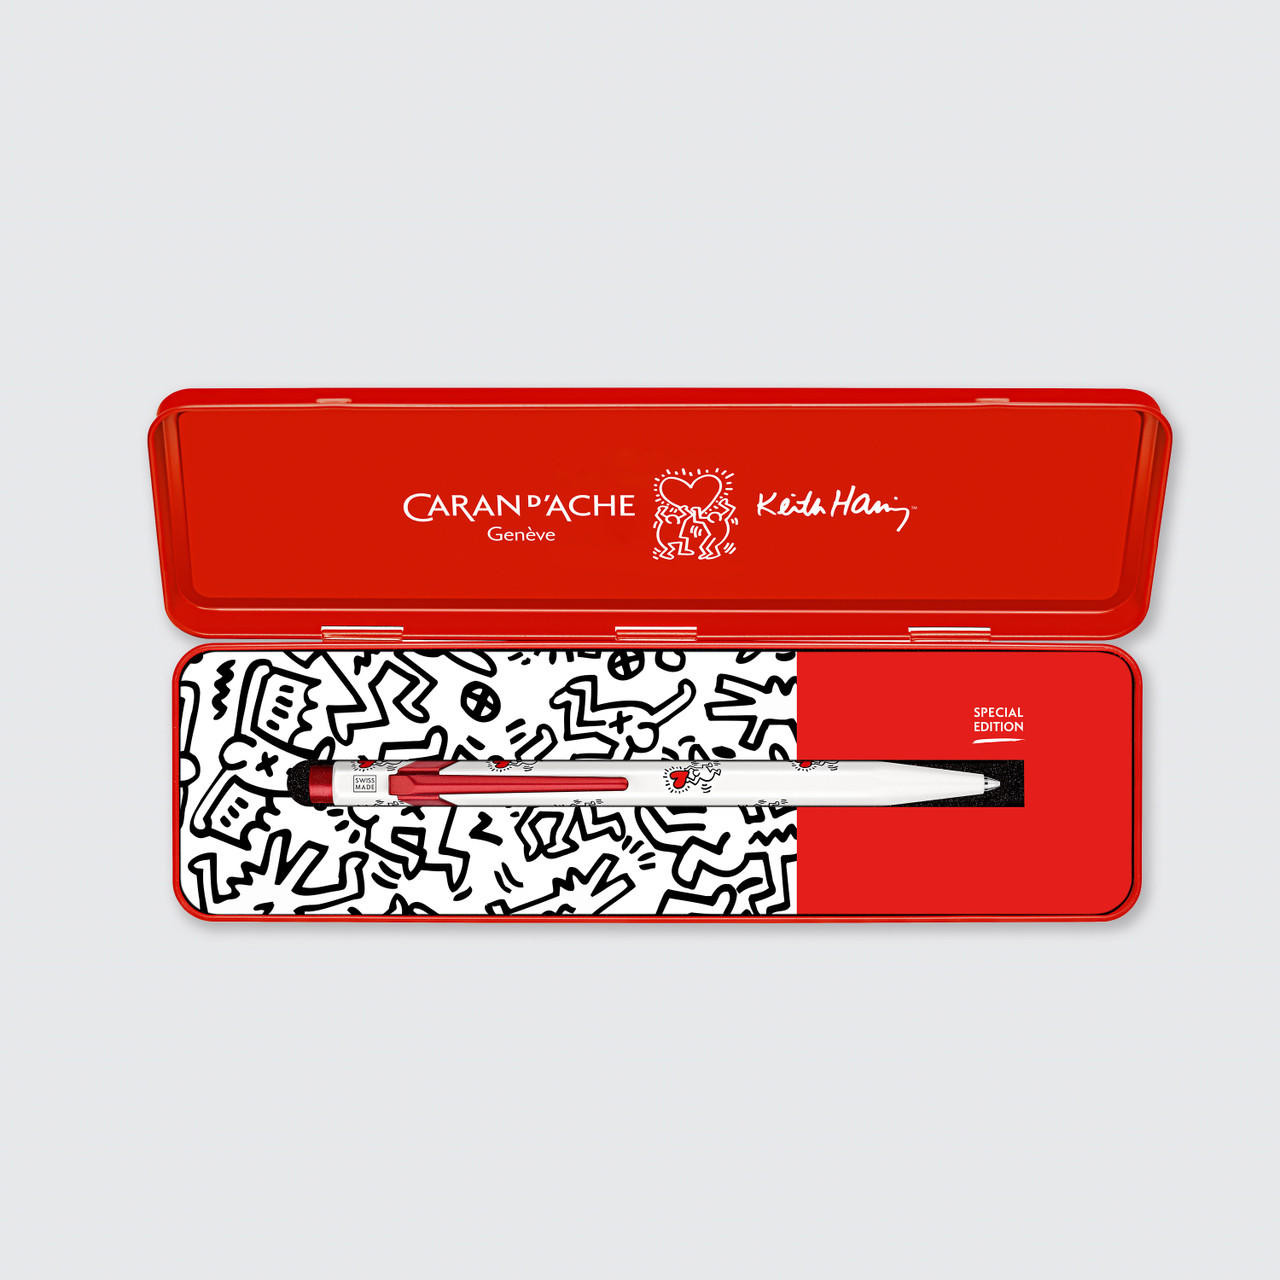 Caran D’ache Keith Haring 849 Ballpoint Pen and Refill in Metal Box White Set